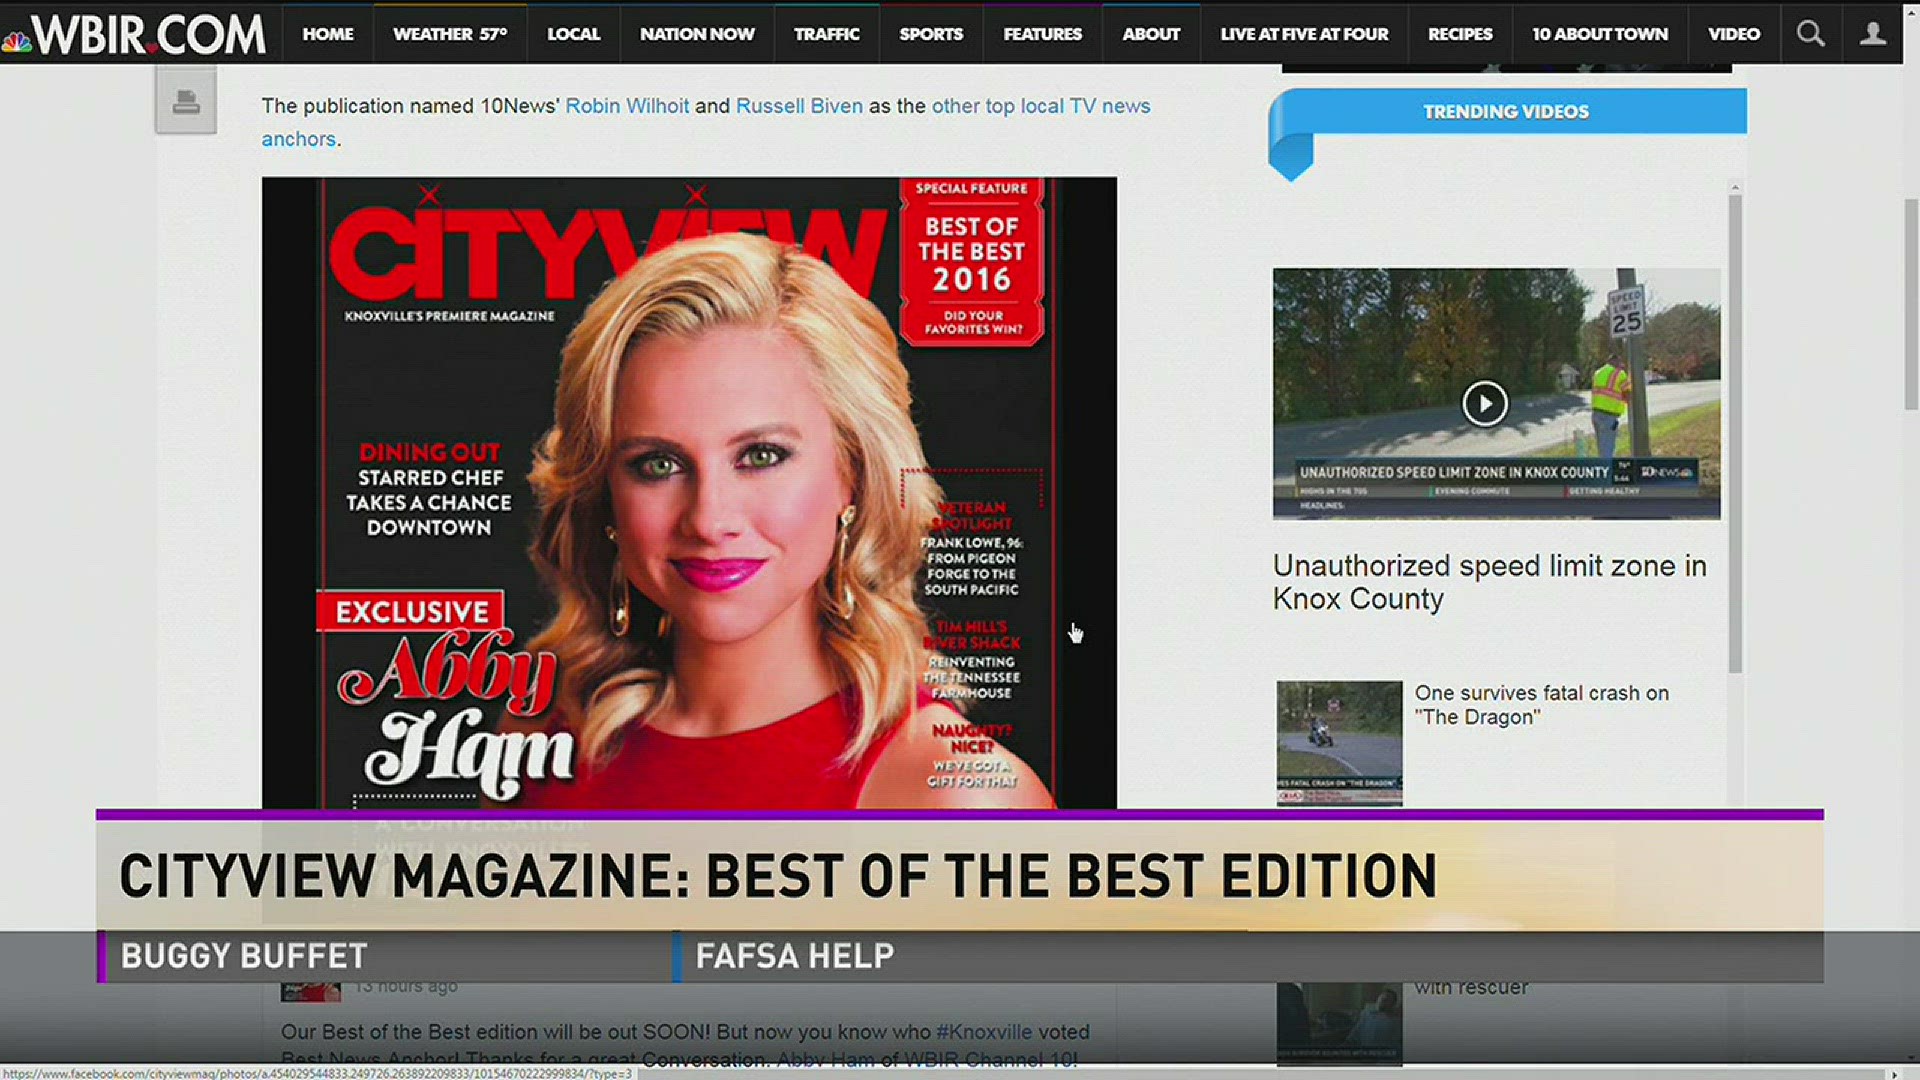 Cityview Magazine named 10News Today anchor Abby Ham as Knoxville's best news anchor in its best of the best 2016.